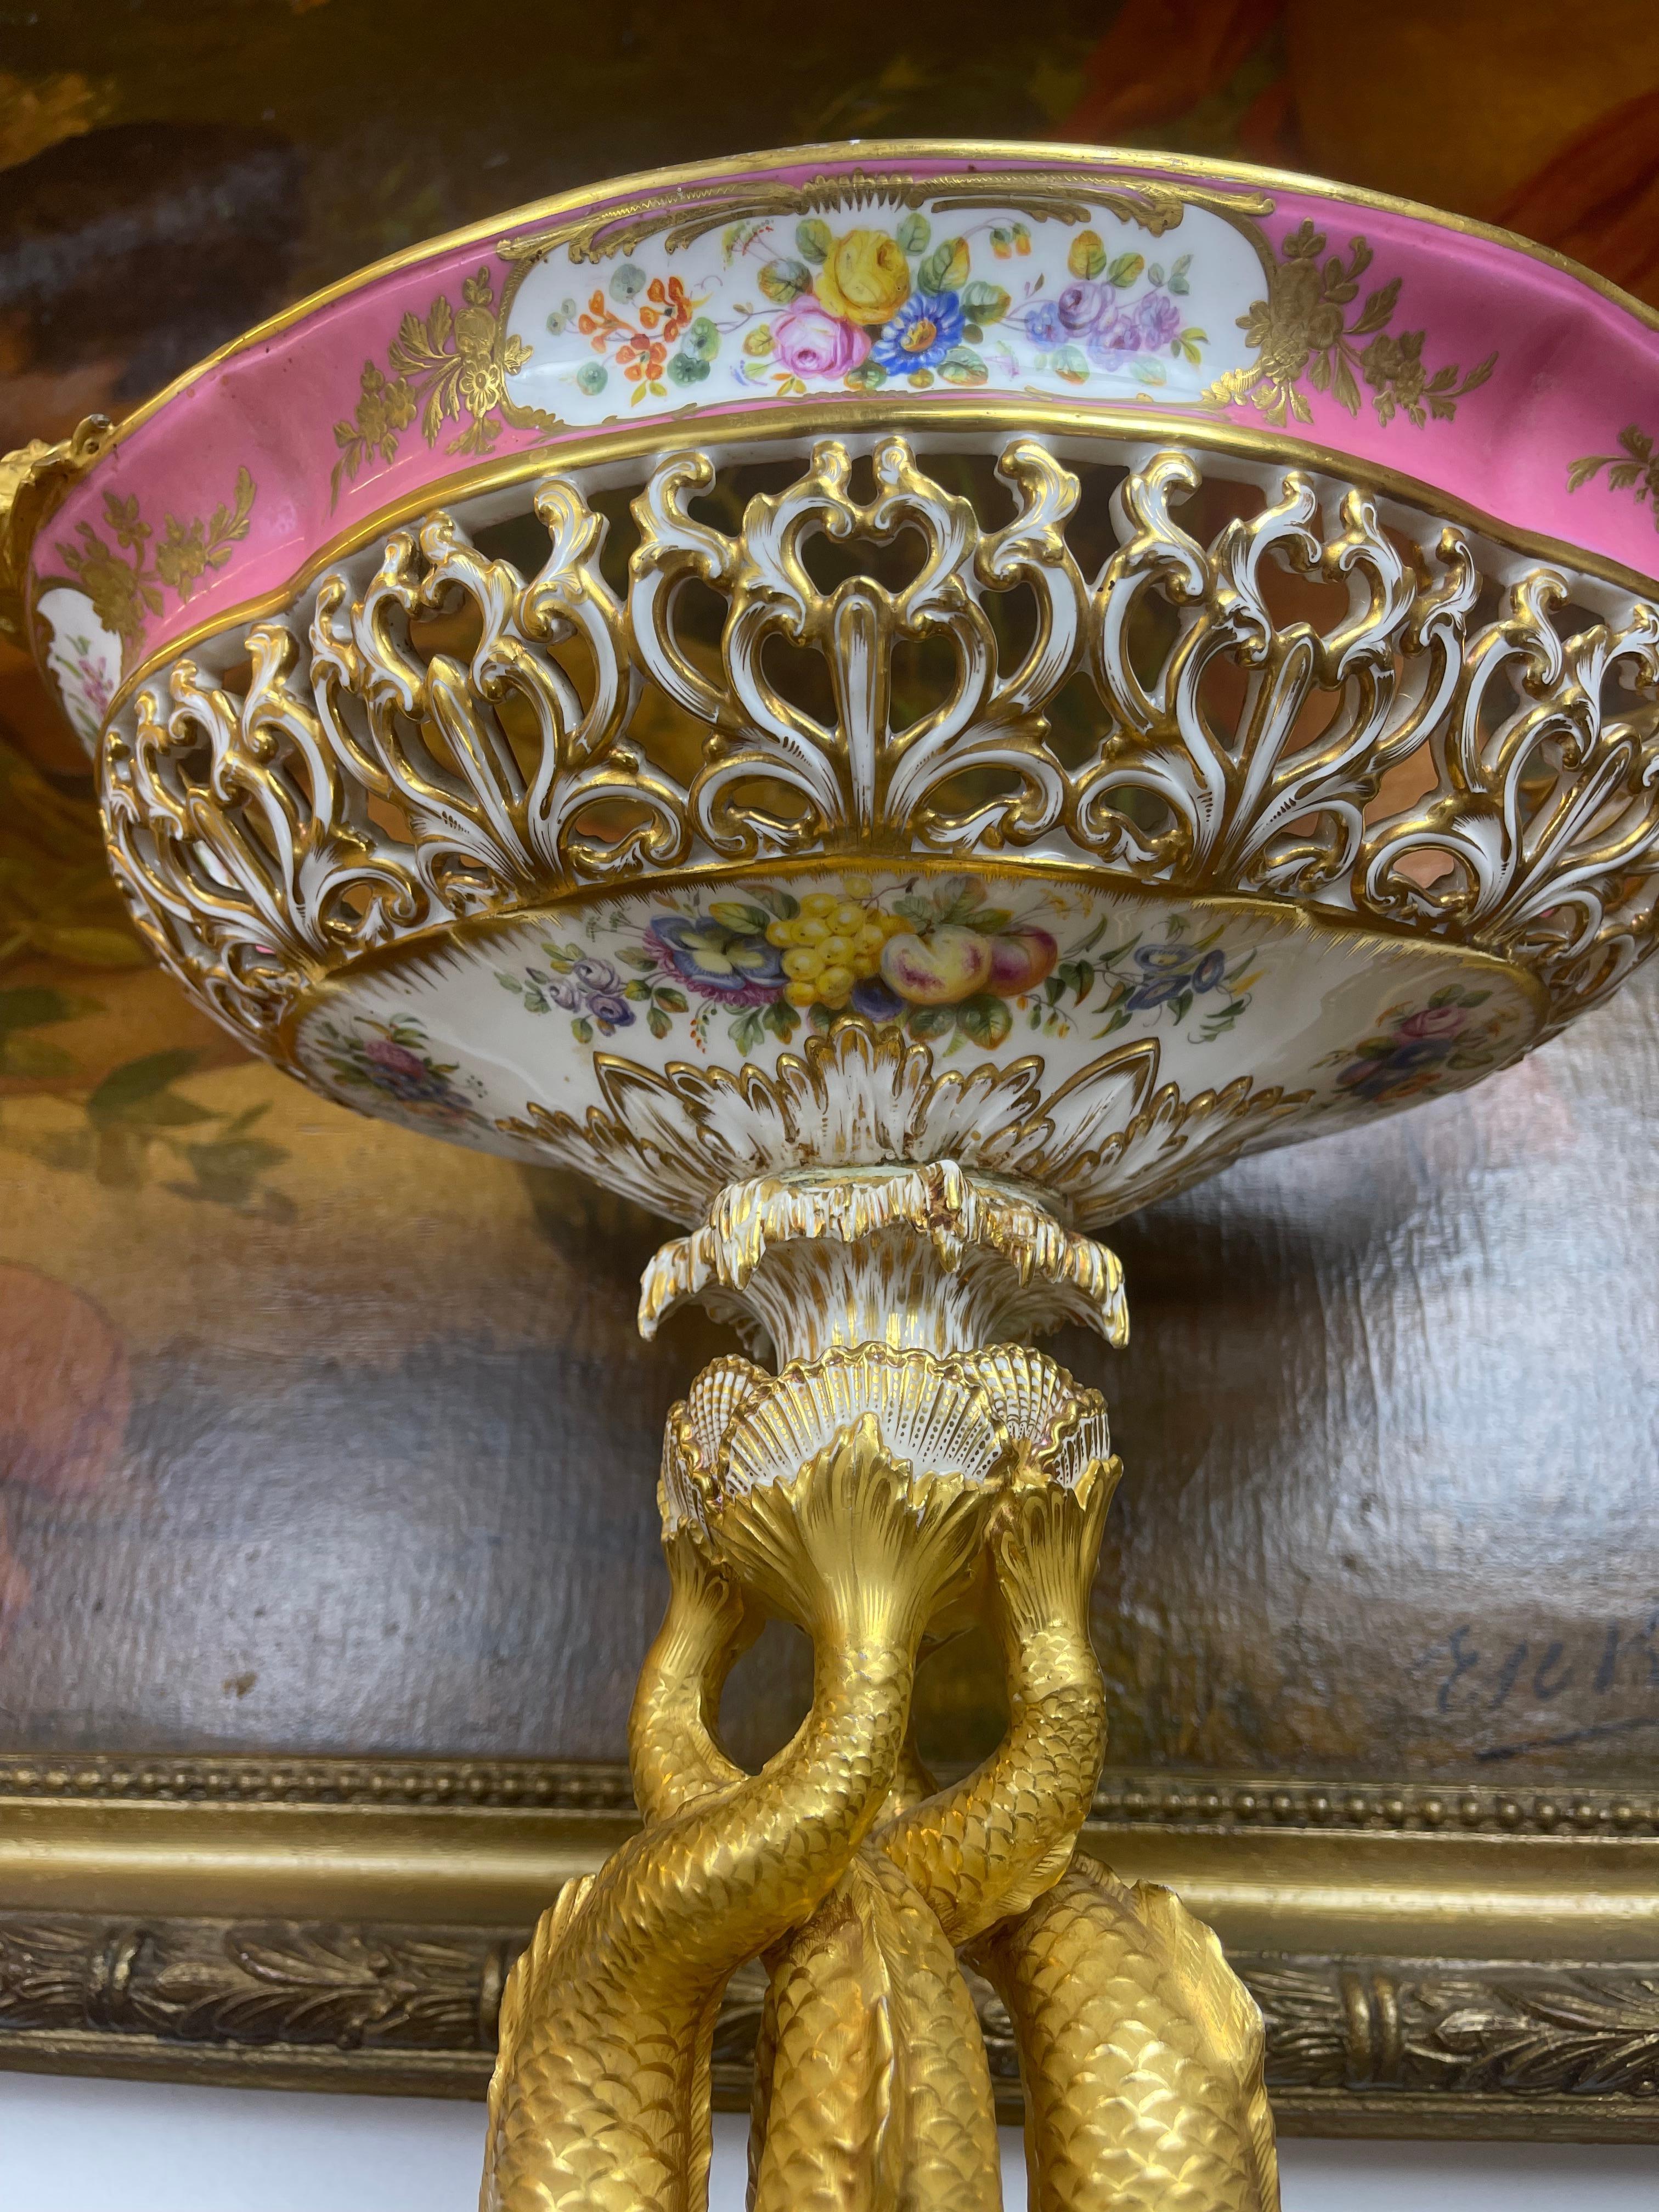 Hand-Crafted Magnificent & Rare 19th C. English Porcelain Centerpiece Retailer�’s Mark Daniell For Sale